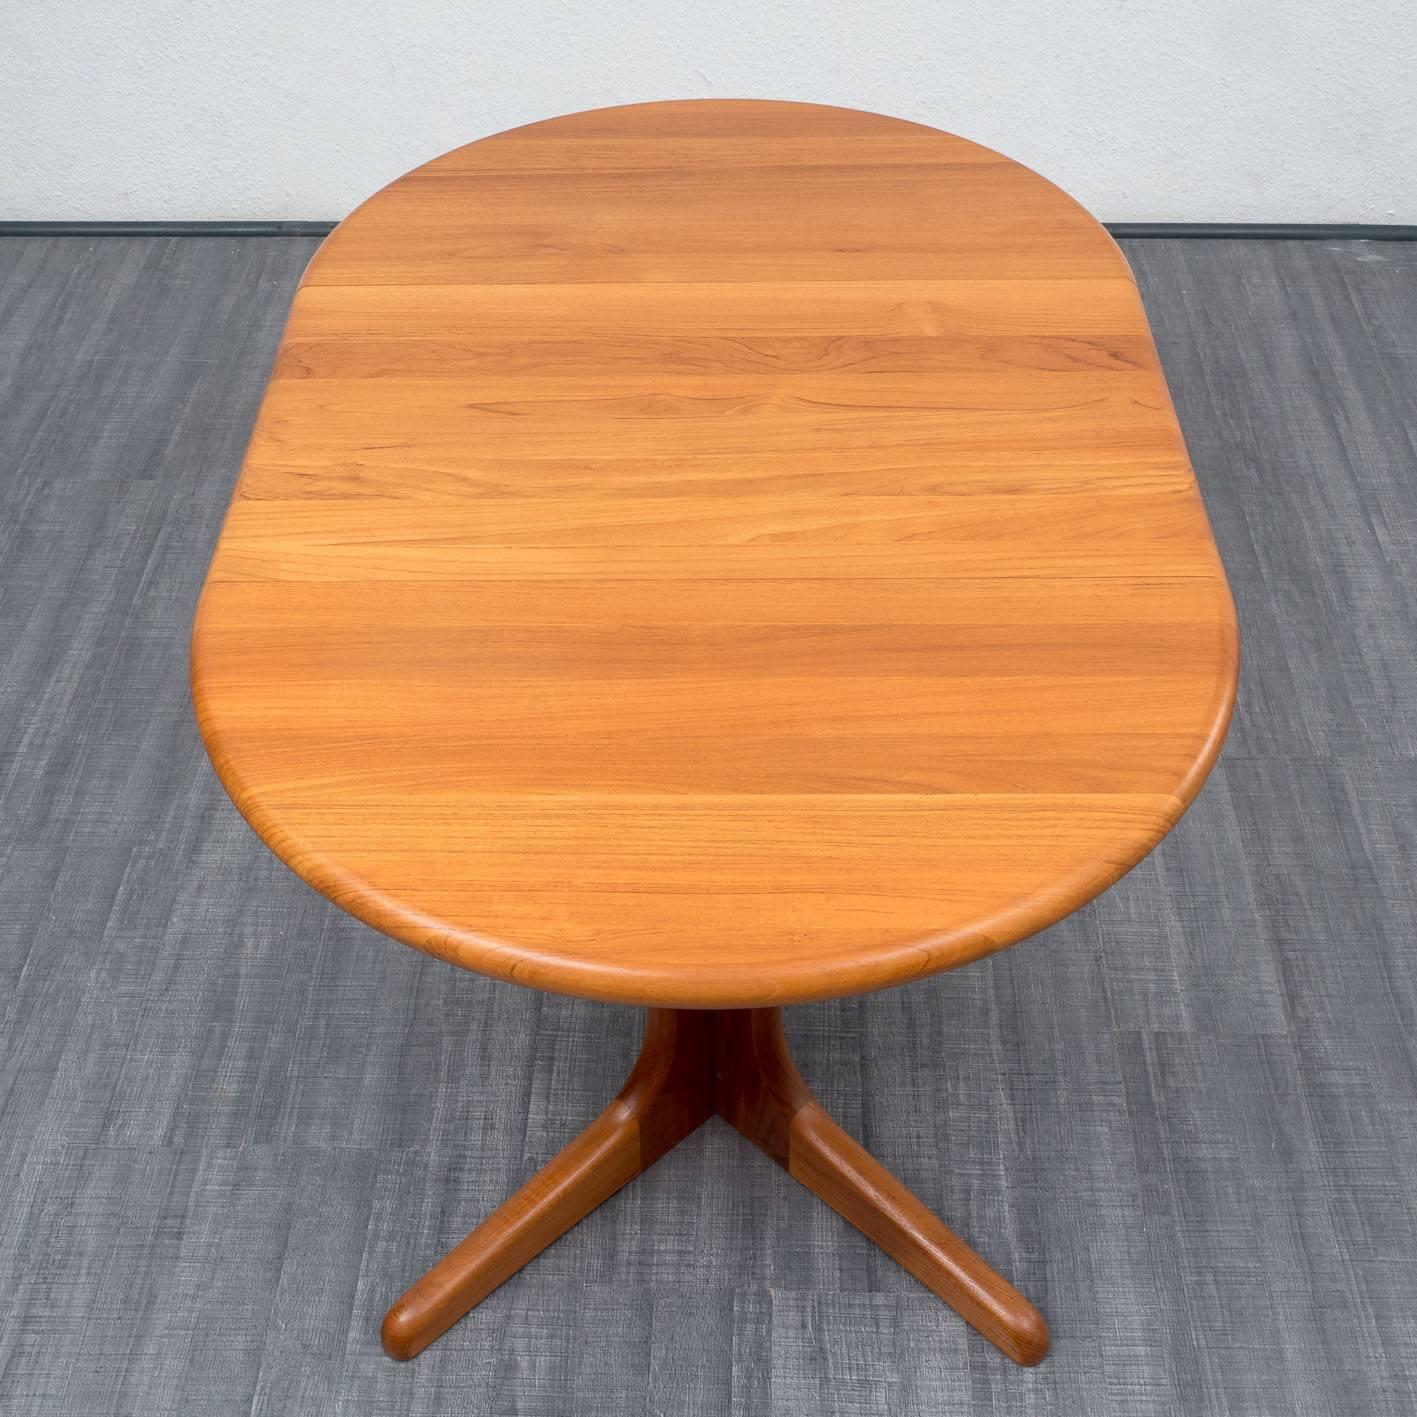 High-quality dining table from the 1960s, design by Niels Koefoed for Koefoed, version 177, made in Denmark. Solid teak frame. The table is extendable with a separate table leaf.

Good condition with small traces of usage.